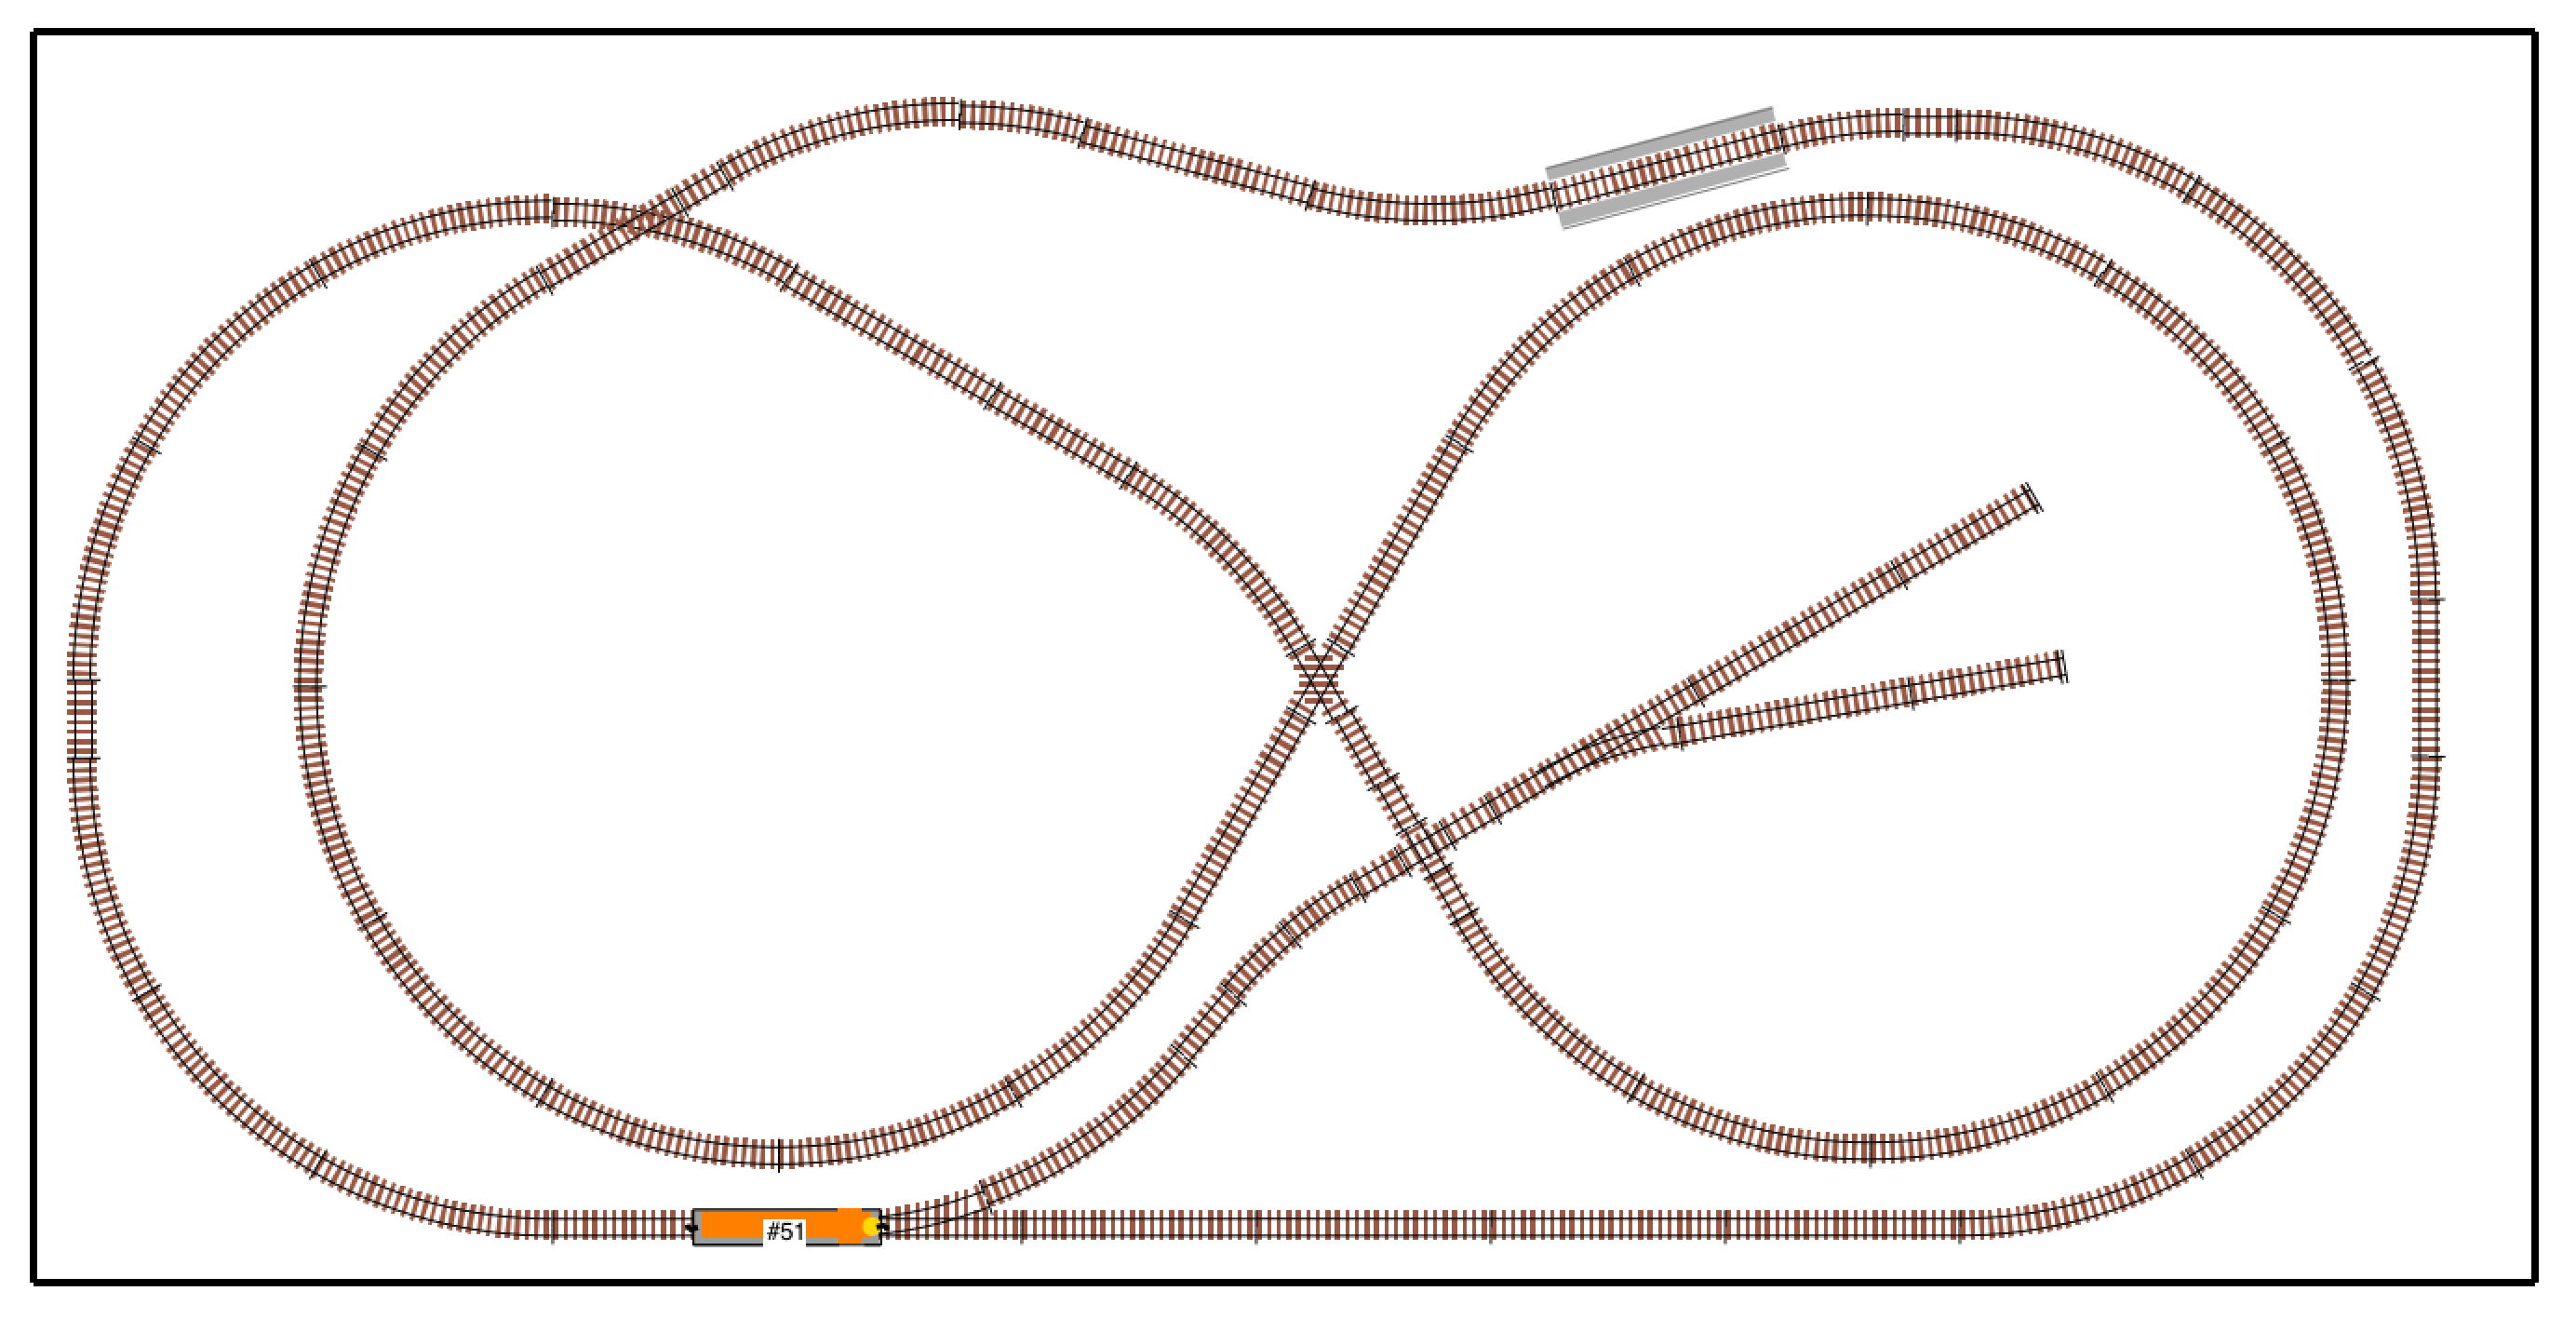 Grand Valley layout track plan